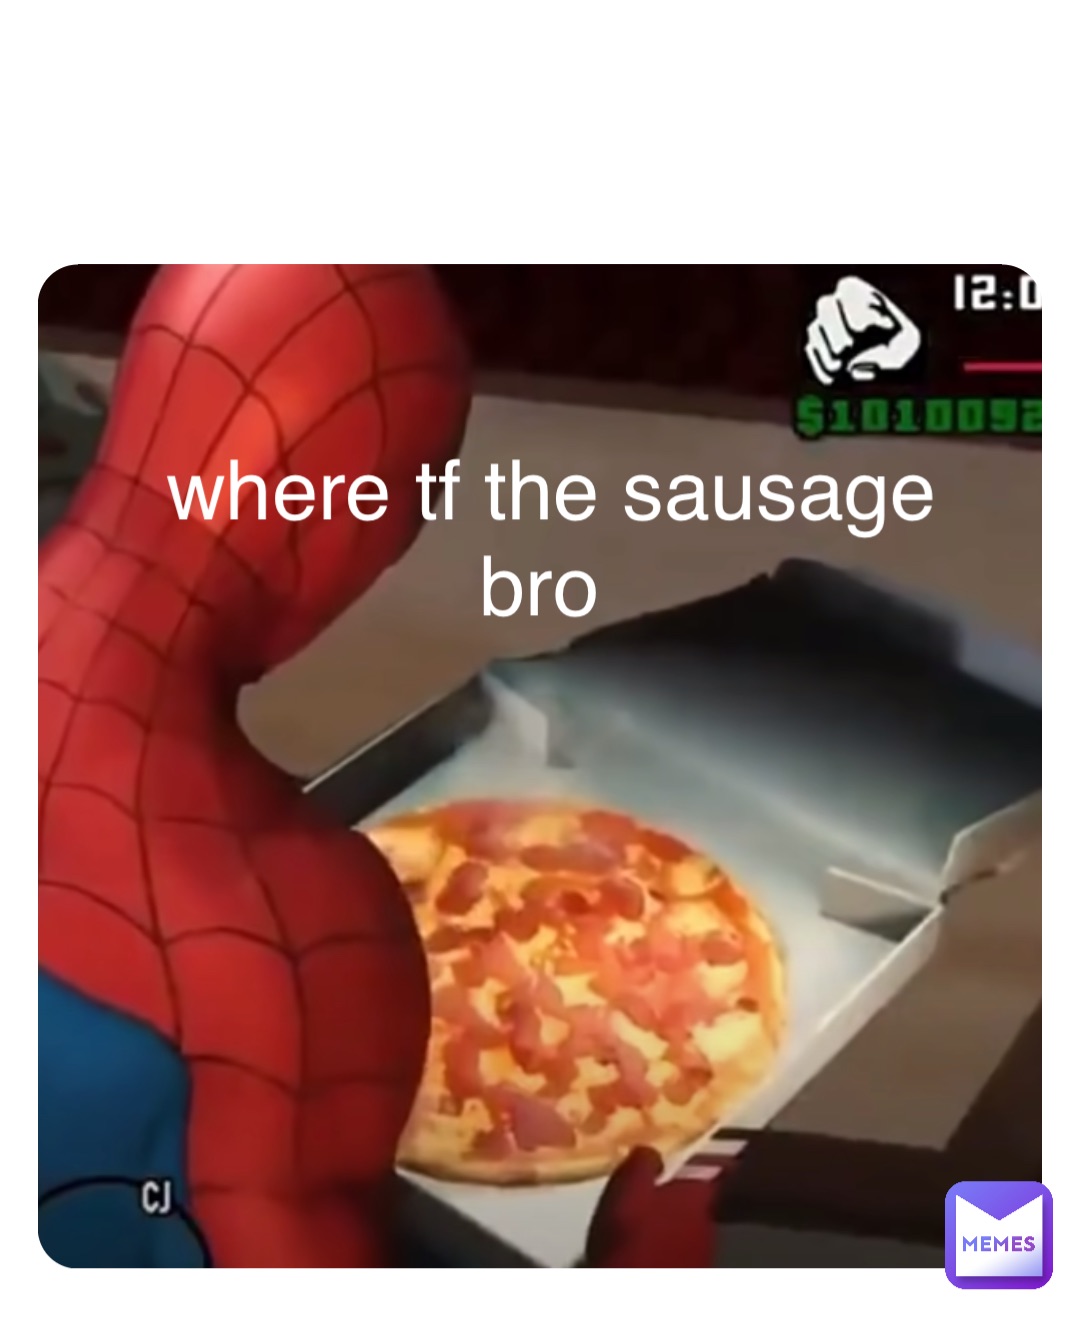 Double tap to edit where tf the sausage bro